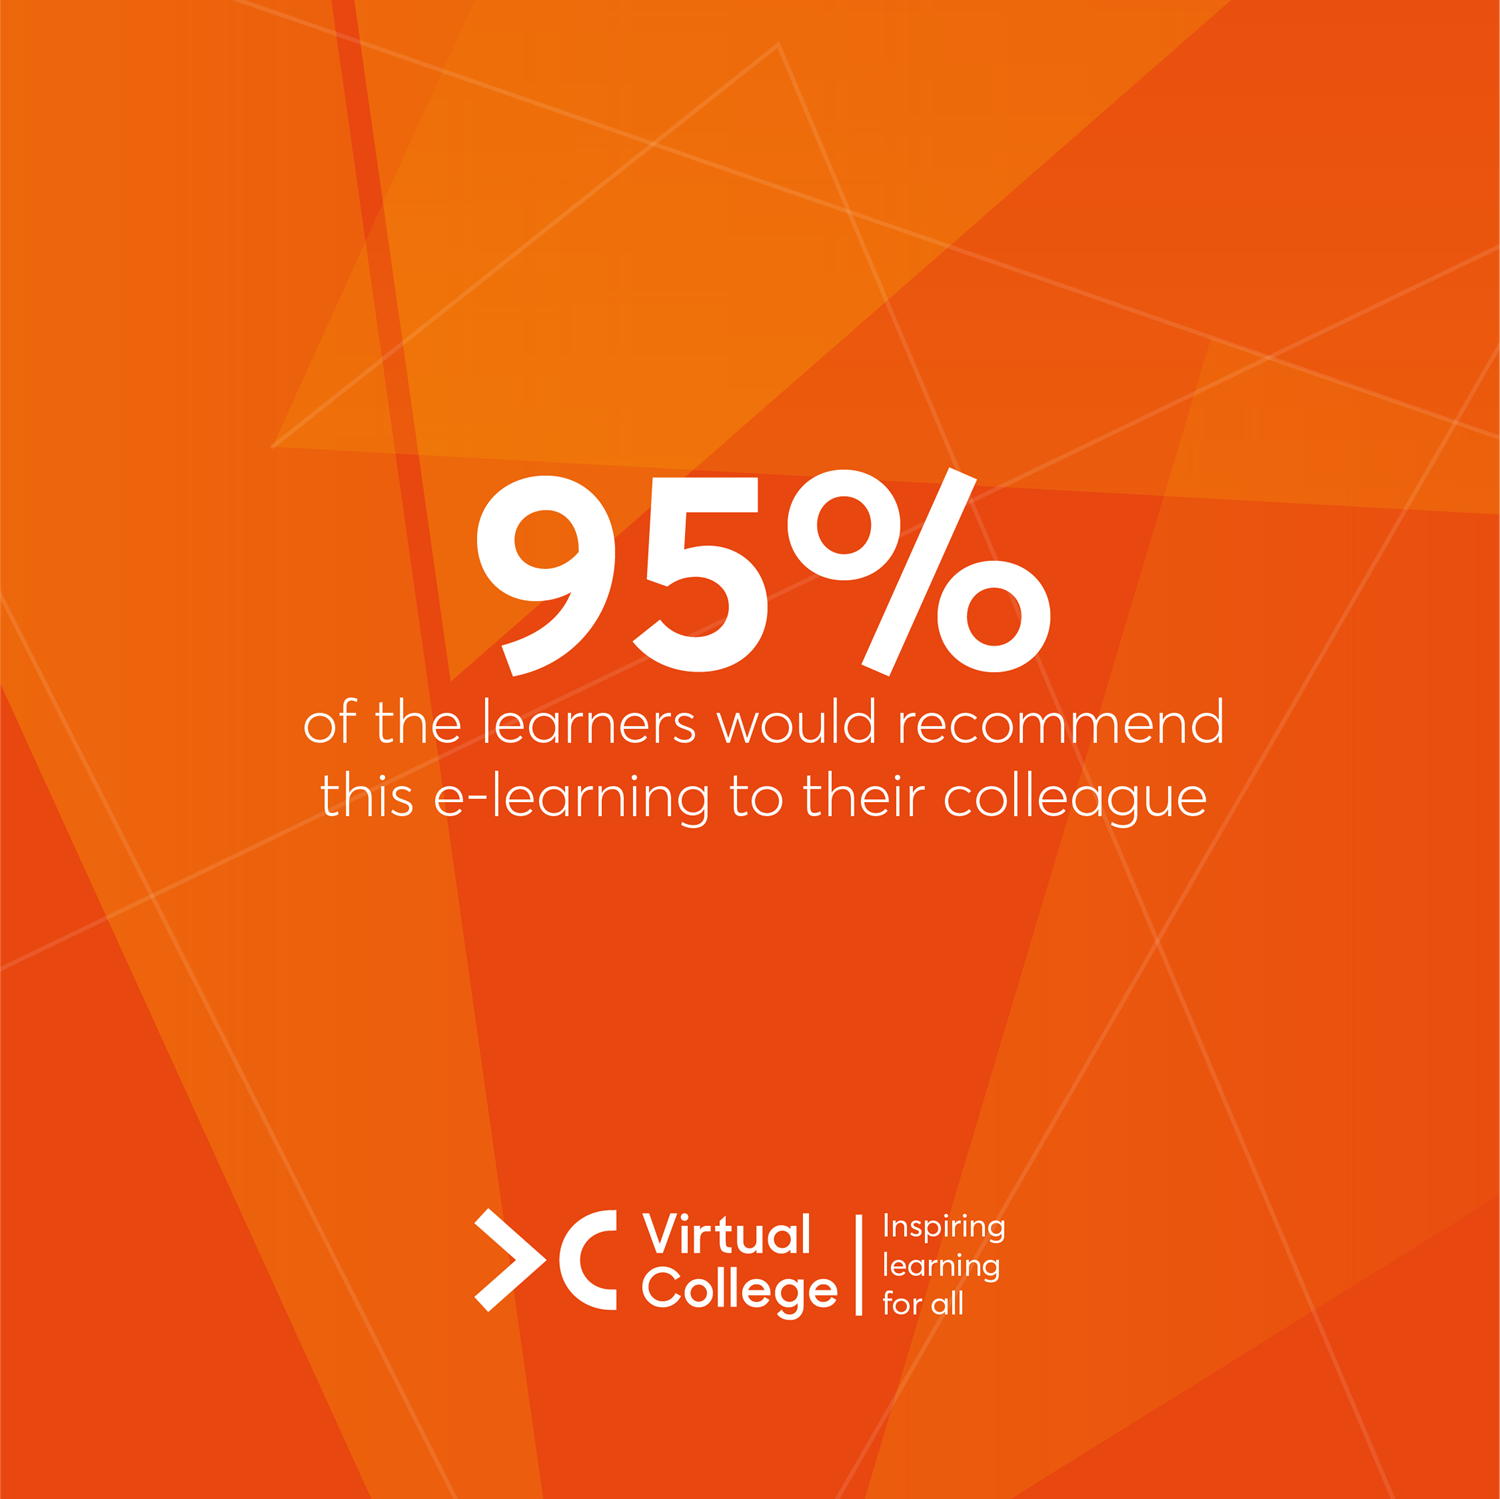 95% of the learners would recommend this e-learning to their colleague